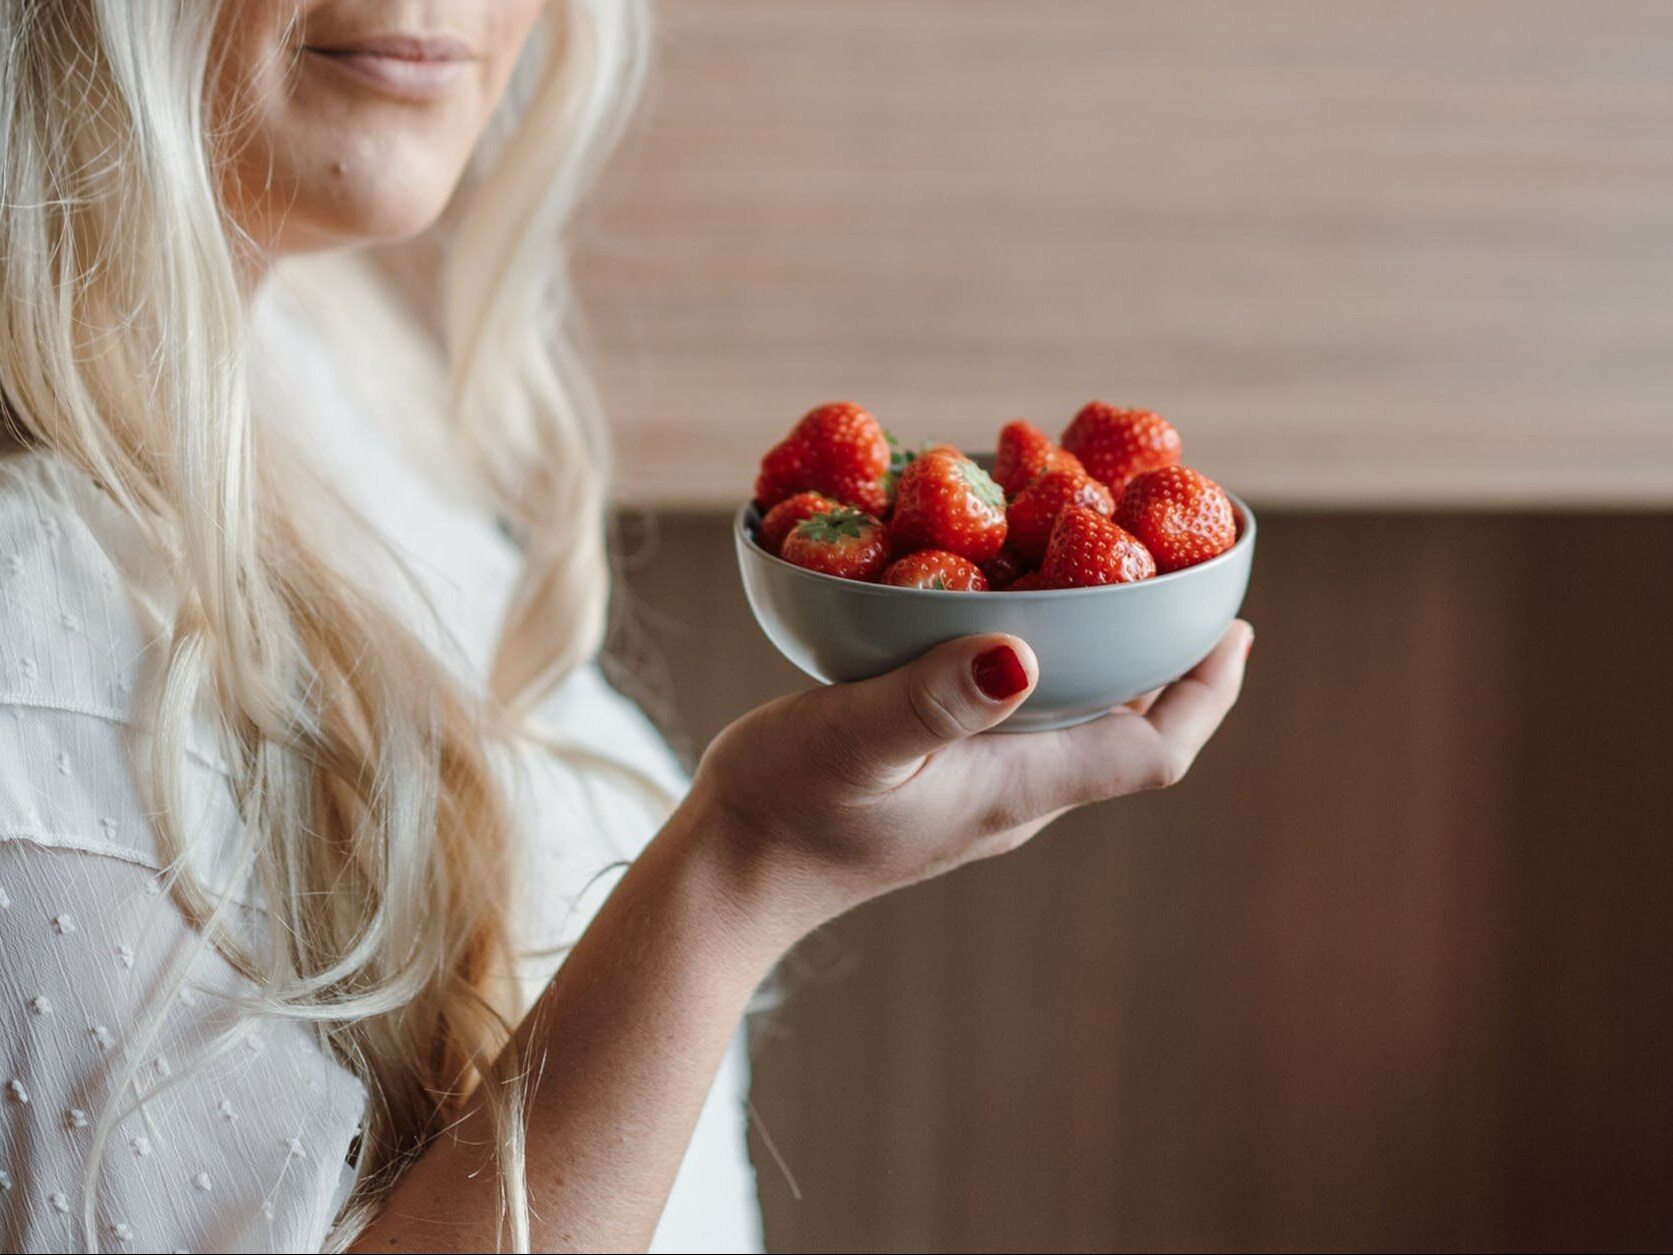 Eating strawberries can be dangerous.  Find out who should avoid them and why